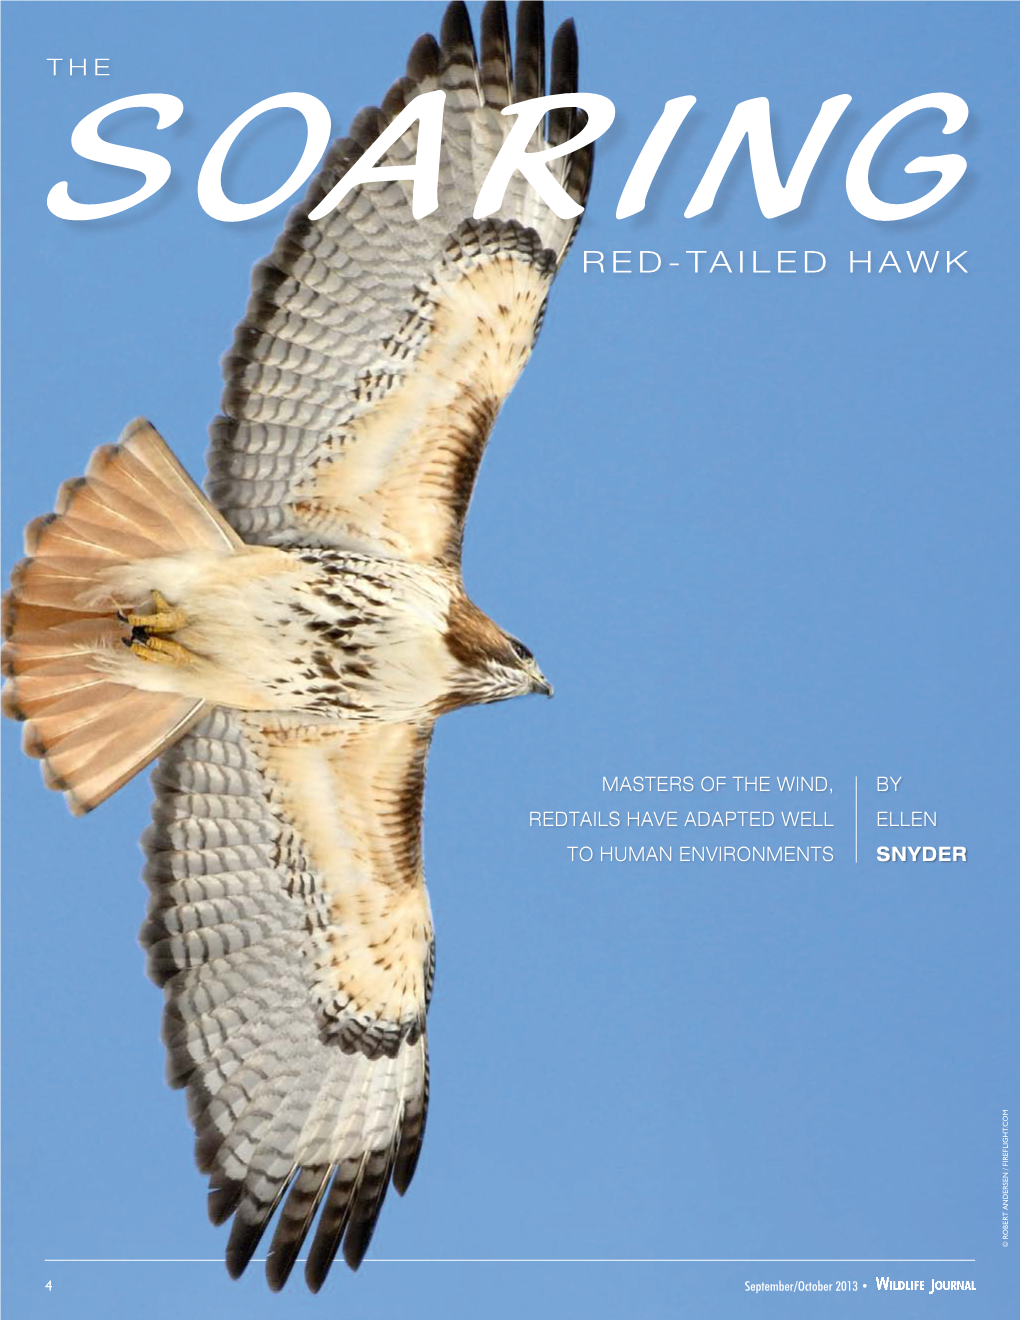 THE SOARING Red-Tailed Hawk